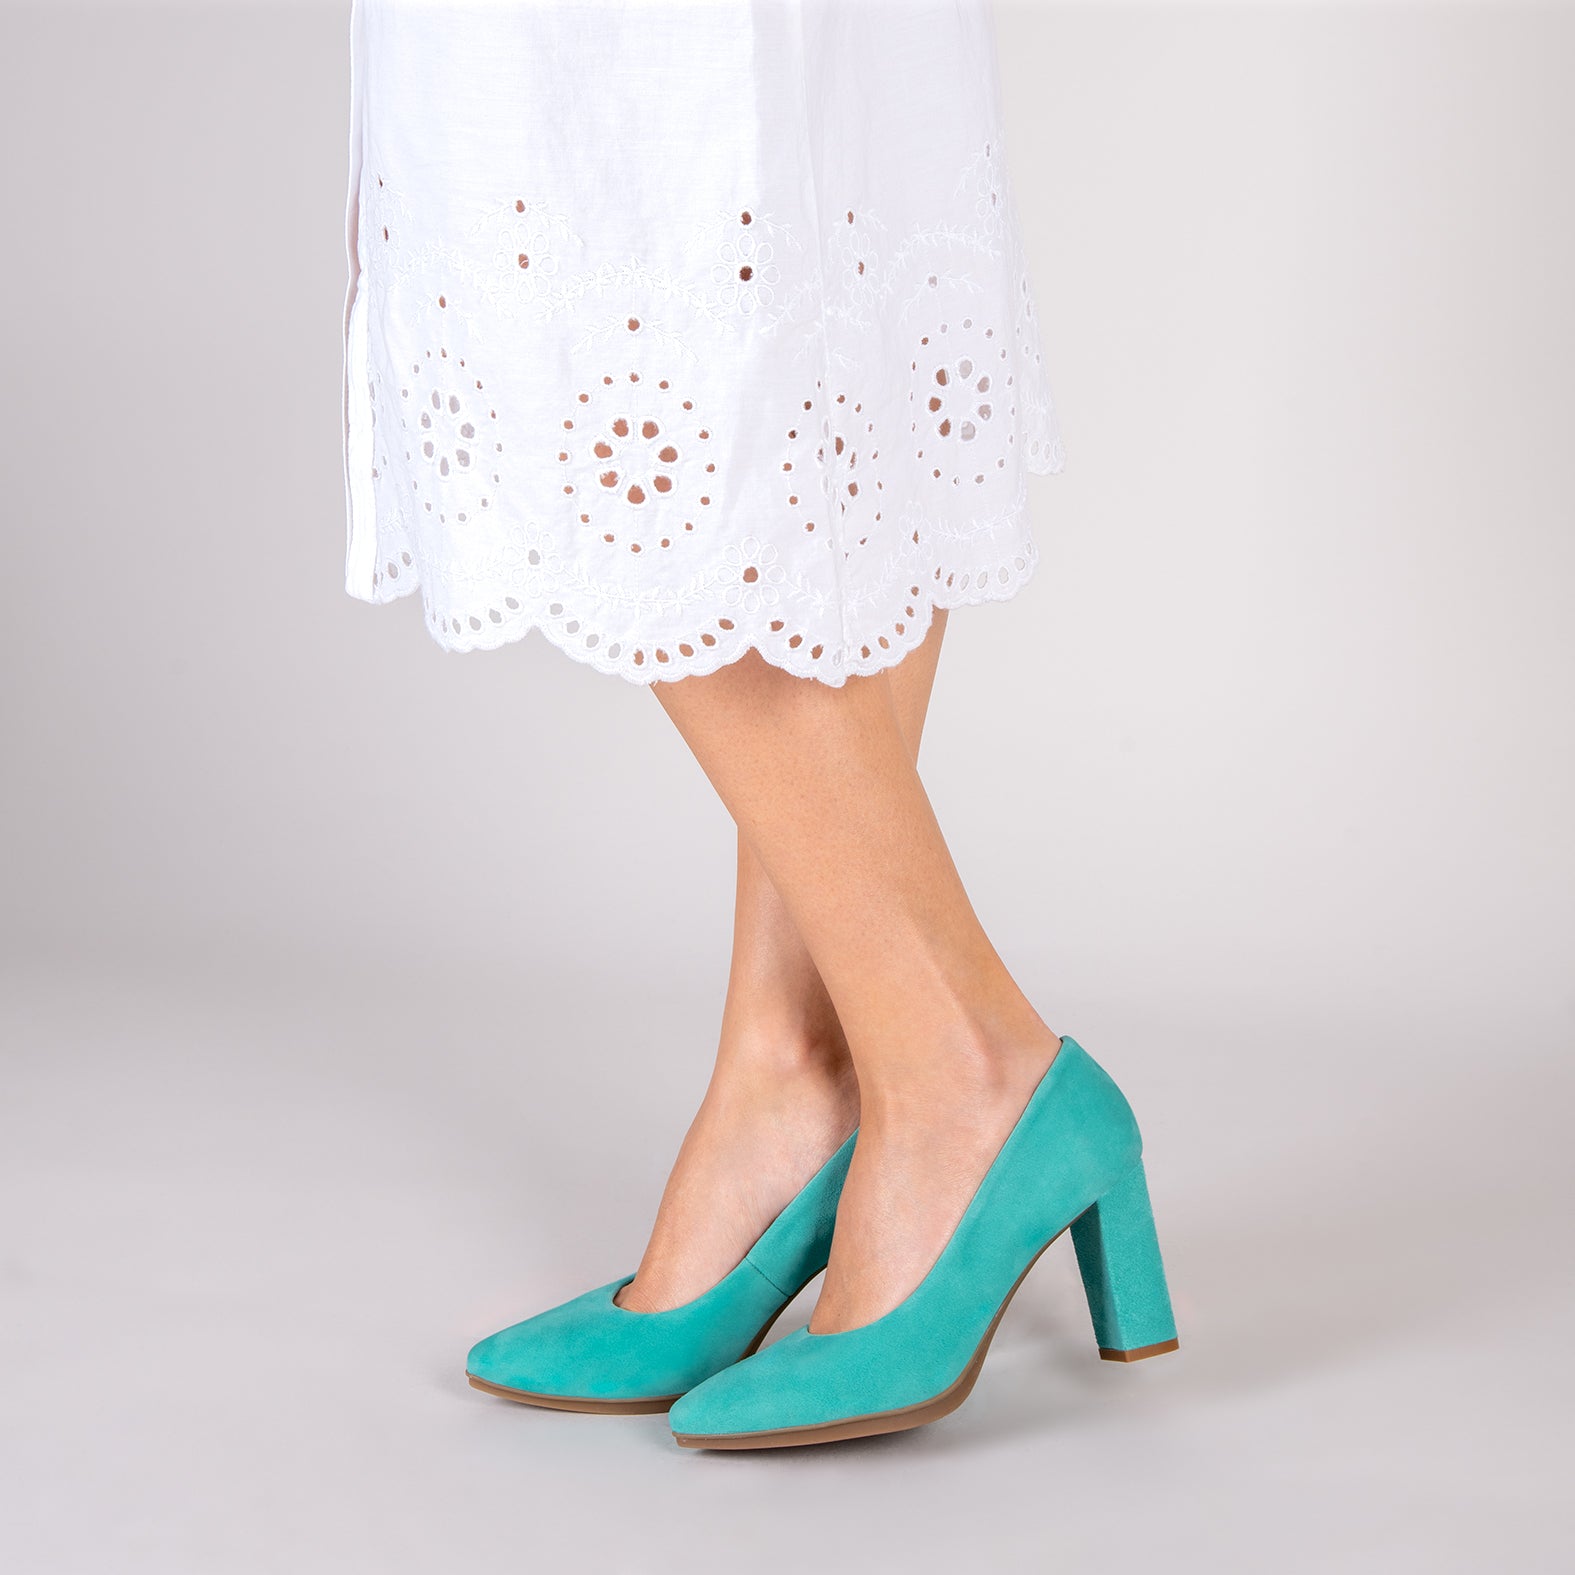 URBAN – TURQUOISE Suede high-heeled shoes 